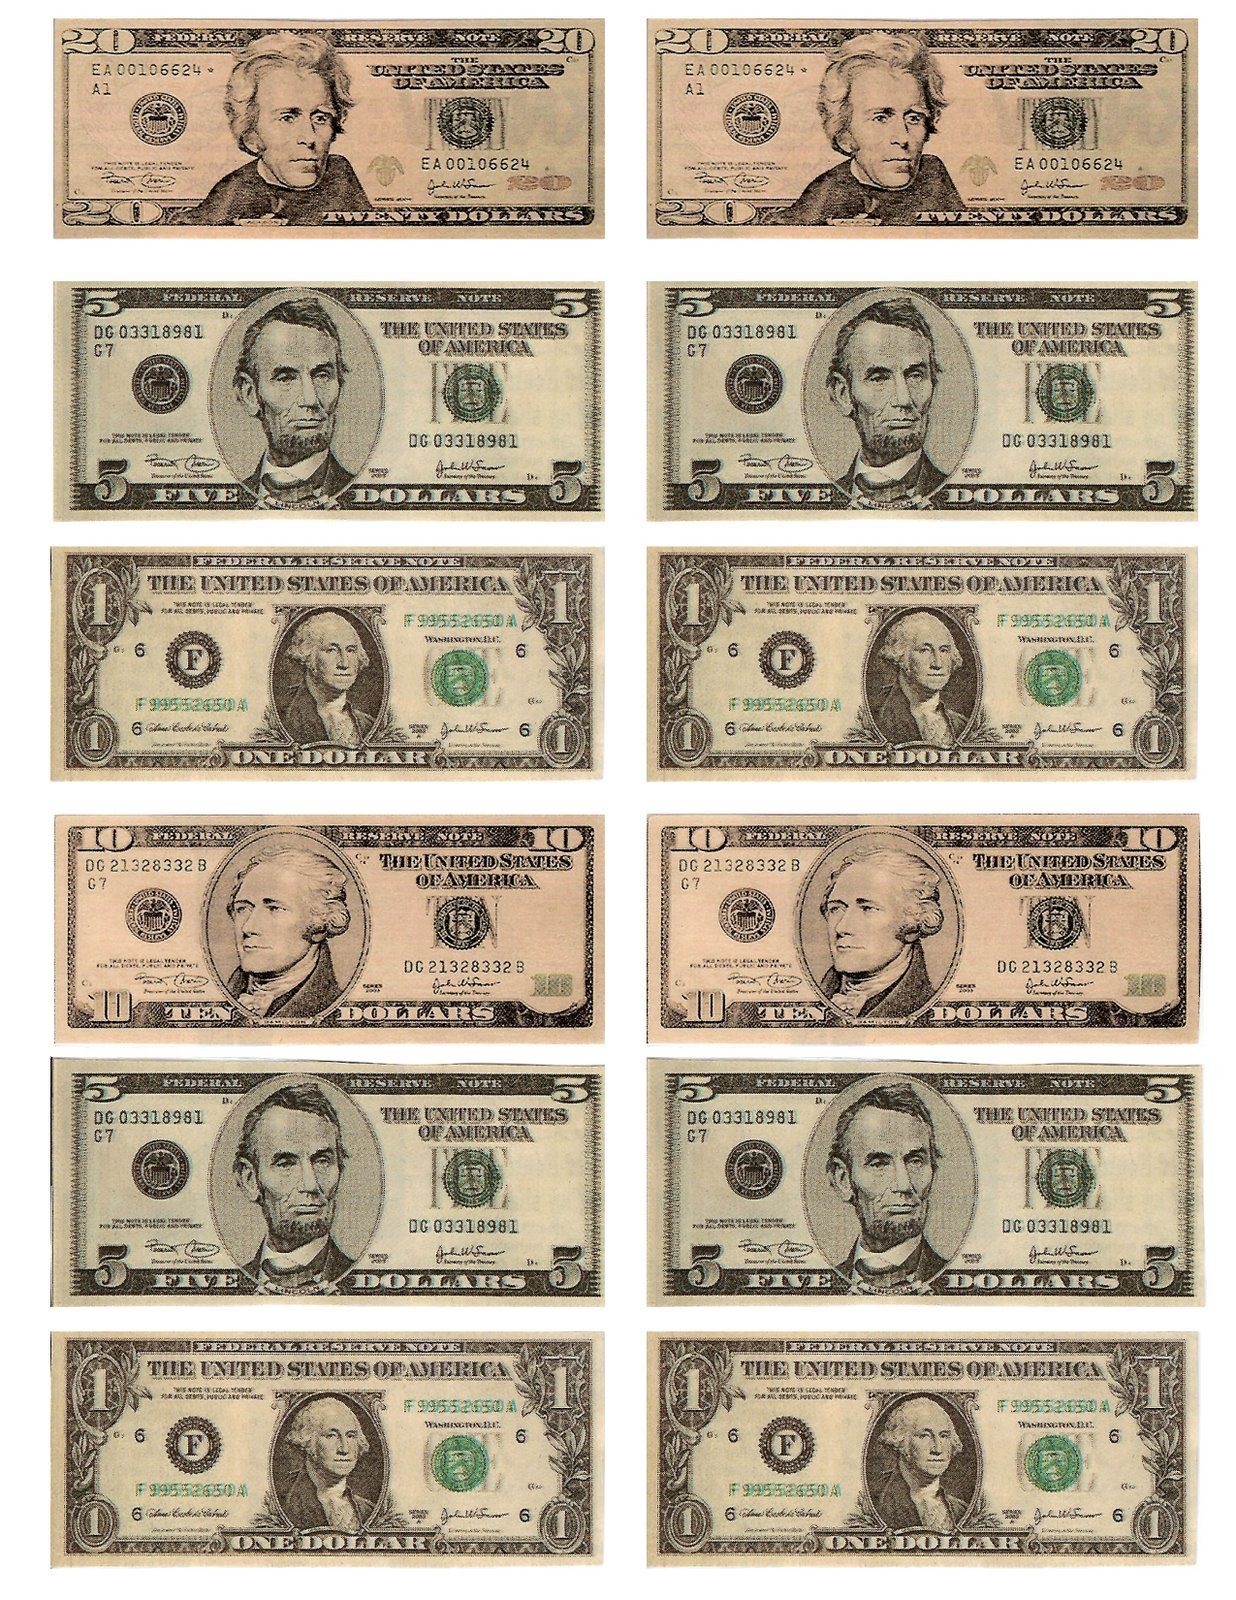 legal-free-printable-money-for-teaching-the-kids-about-american-free-printable-fake-money-that-looks-real.jpg